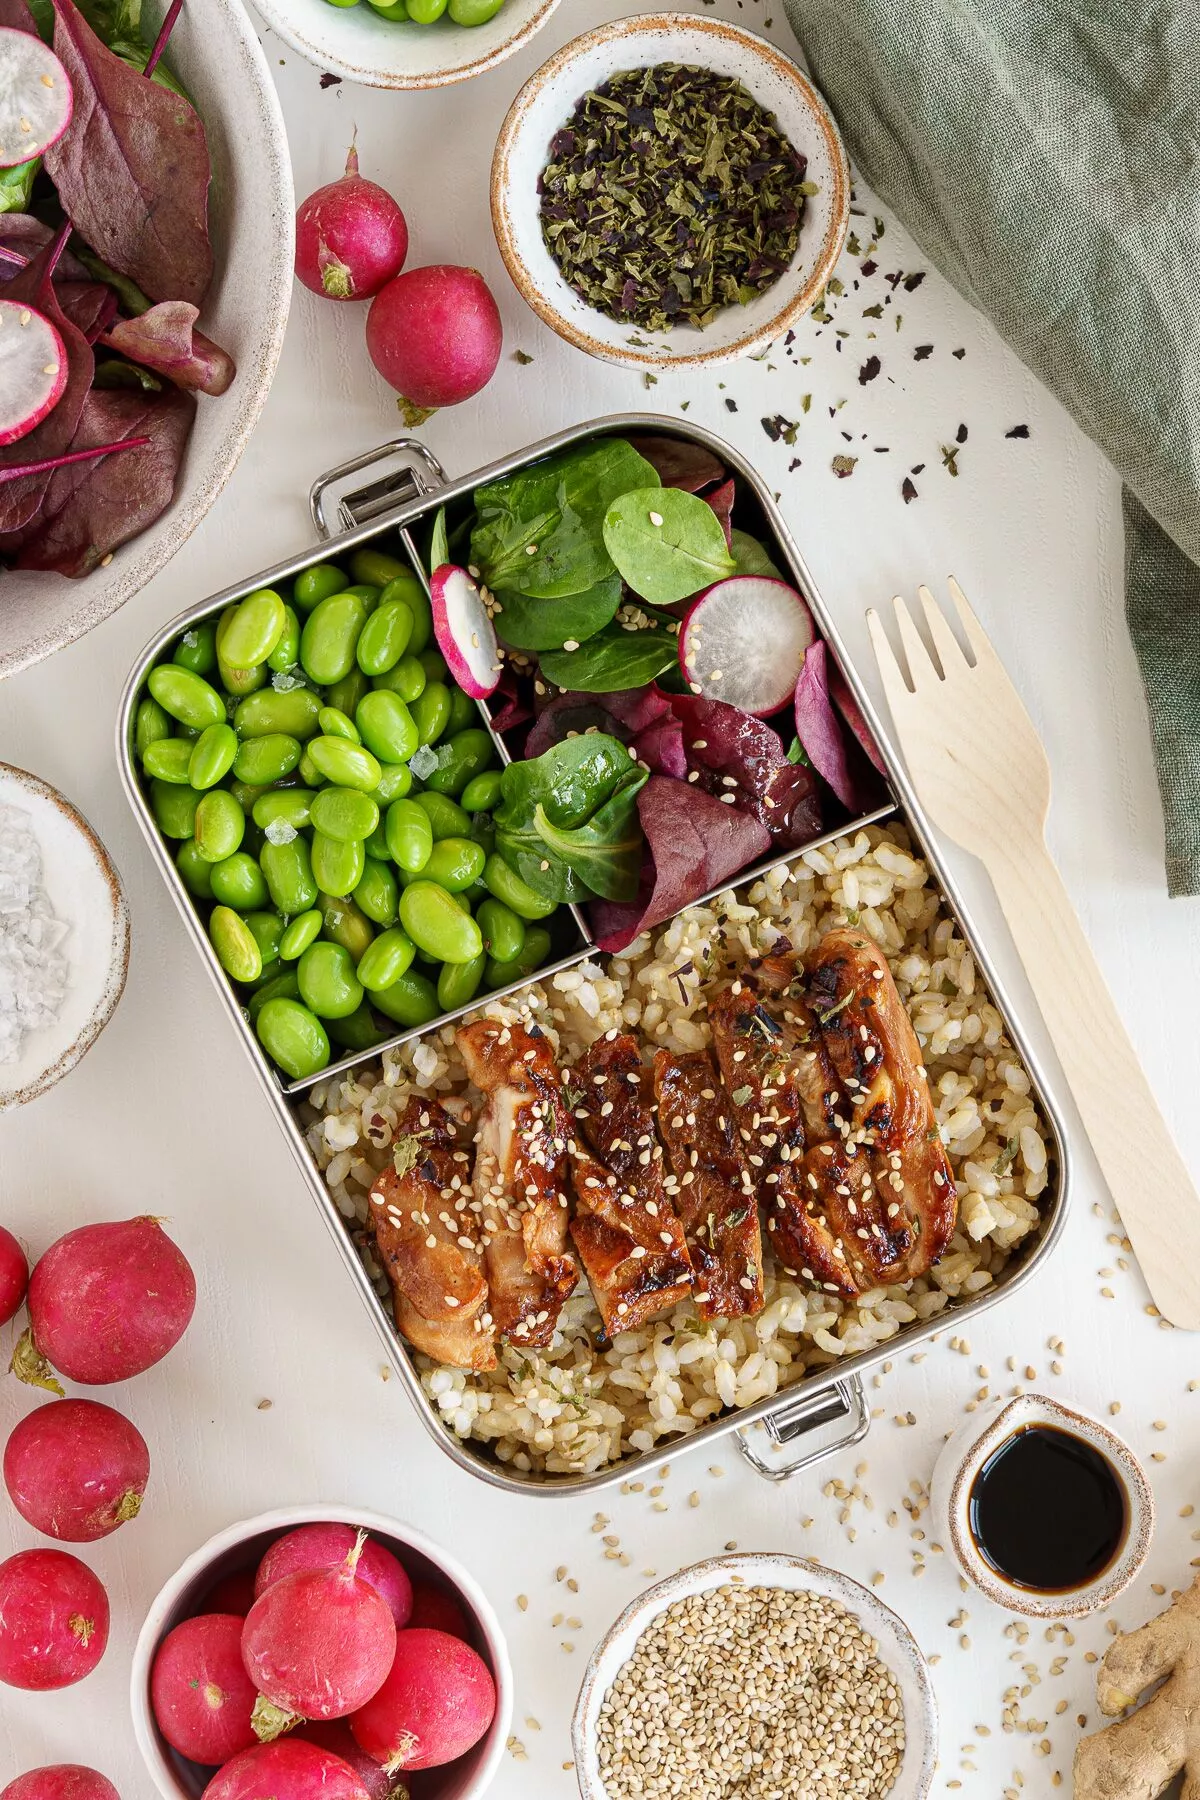 chicken teriyaki bento box as one of our ghigh protein lunch meal preps